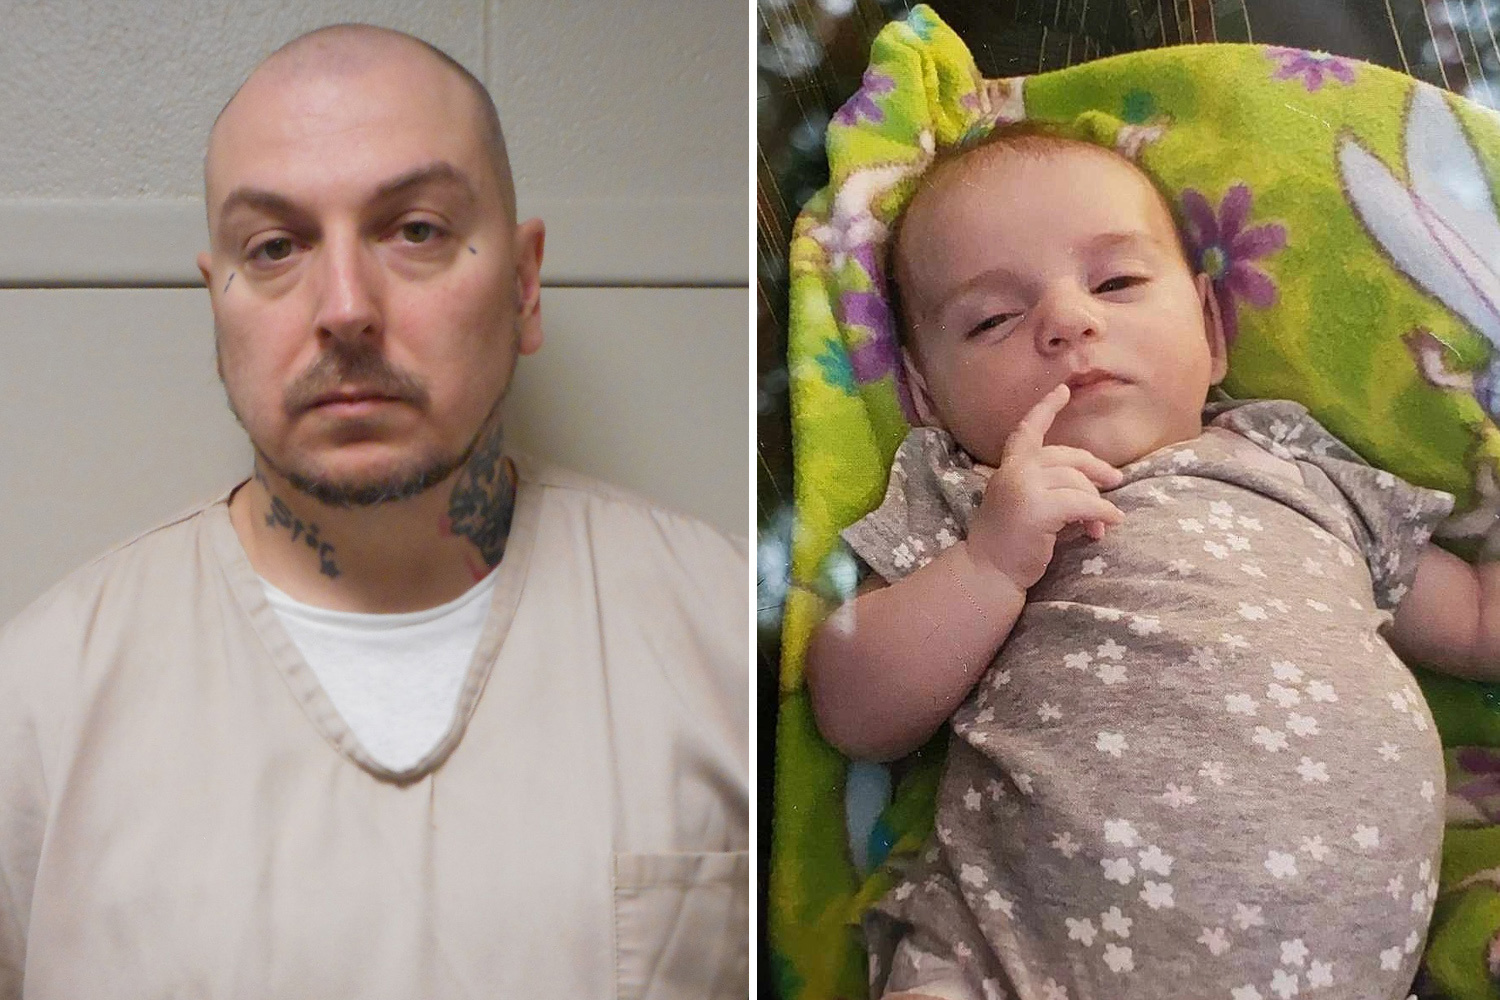 A West Virginia Man Accused Of Killing Infant Daughter Is Set To Be Married His Fiancé Is A